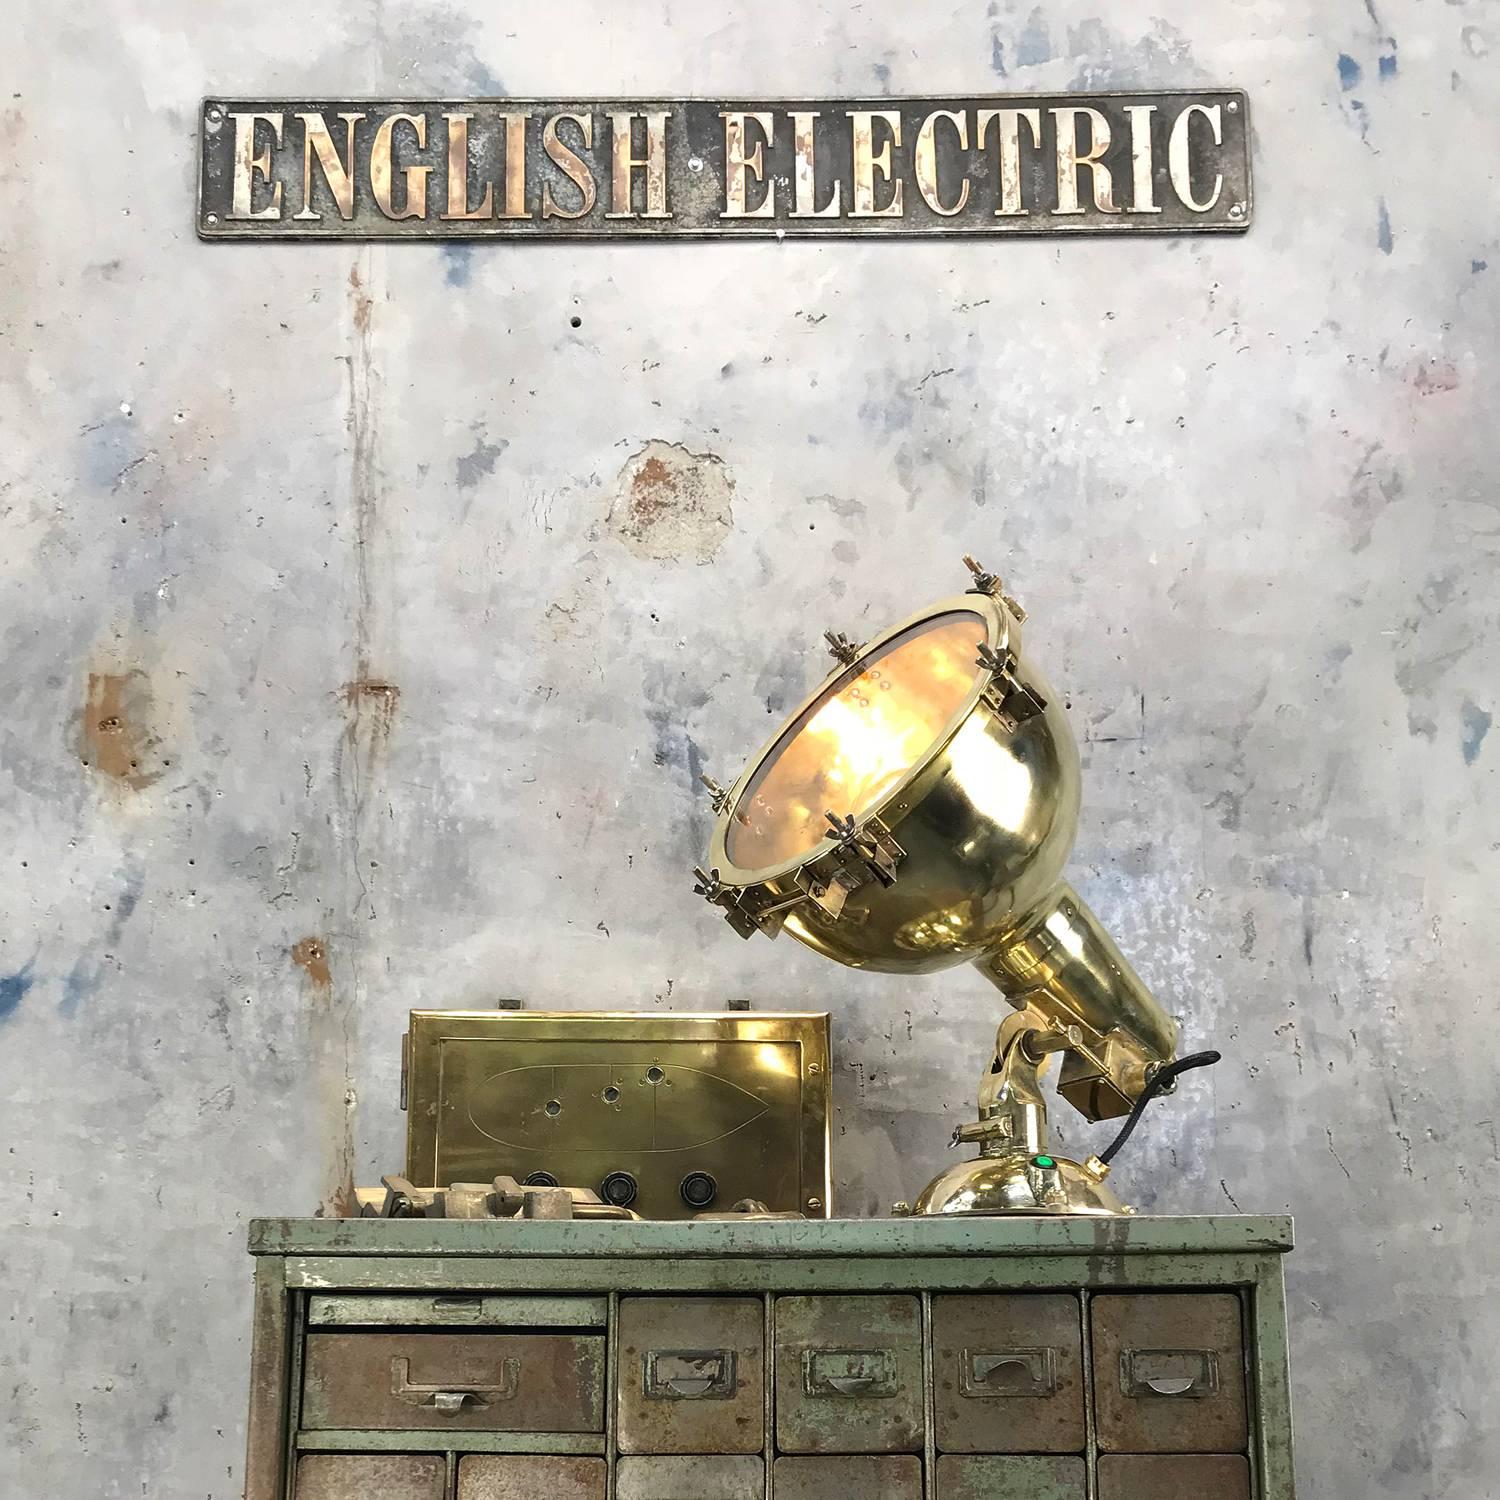 Japanese brass searchlight converted to desk lamp.

A complete brass fixture with all methods of fabrication, cast brass base, spun searchlight dome, and pressed fittings.

Reclaimed from Super tankers built in the 1960s and 1970s, these lights